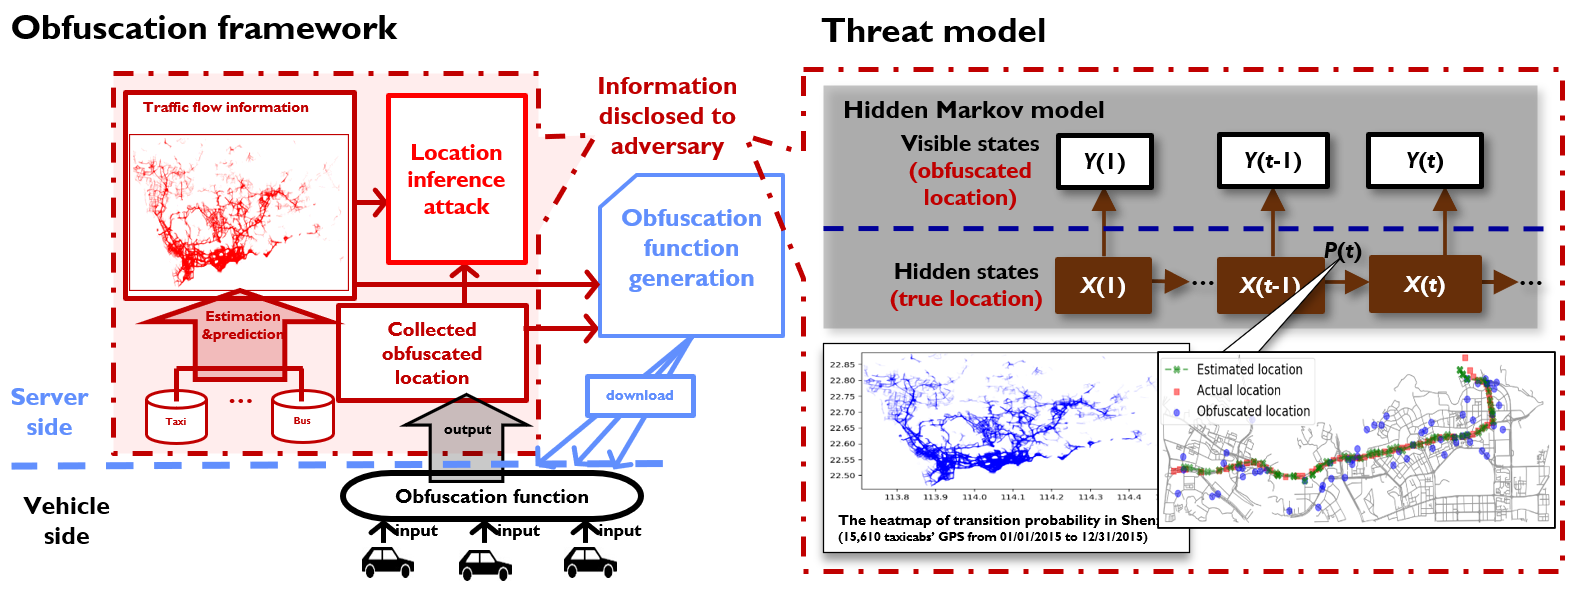 Block diagram of Obfuscation framework and threat model